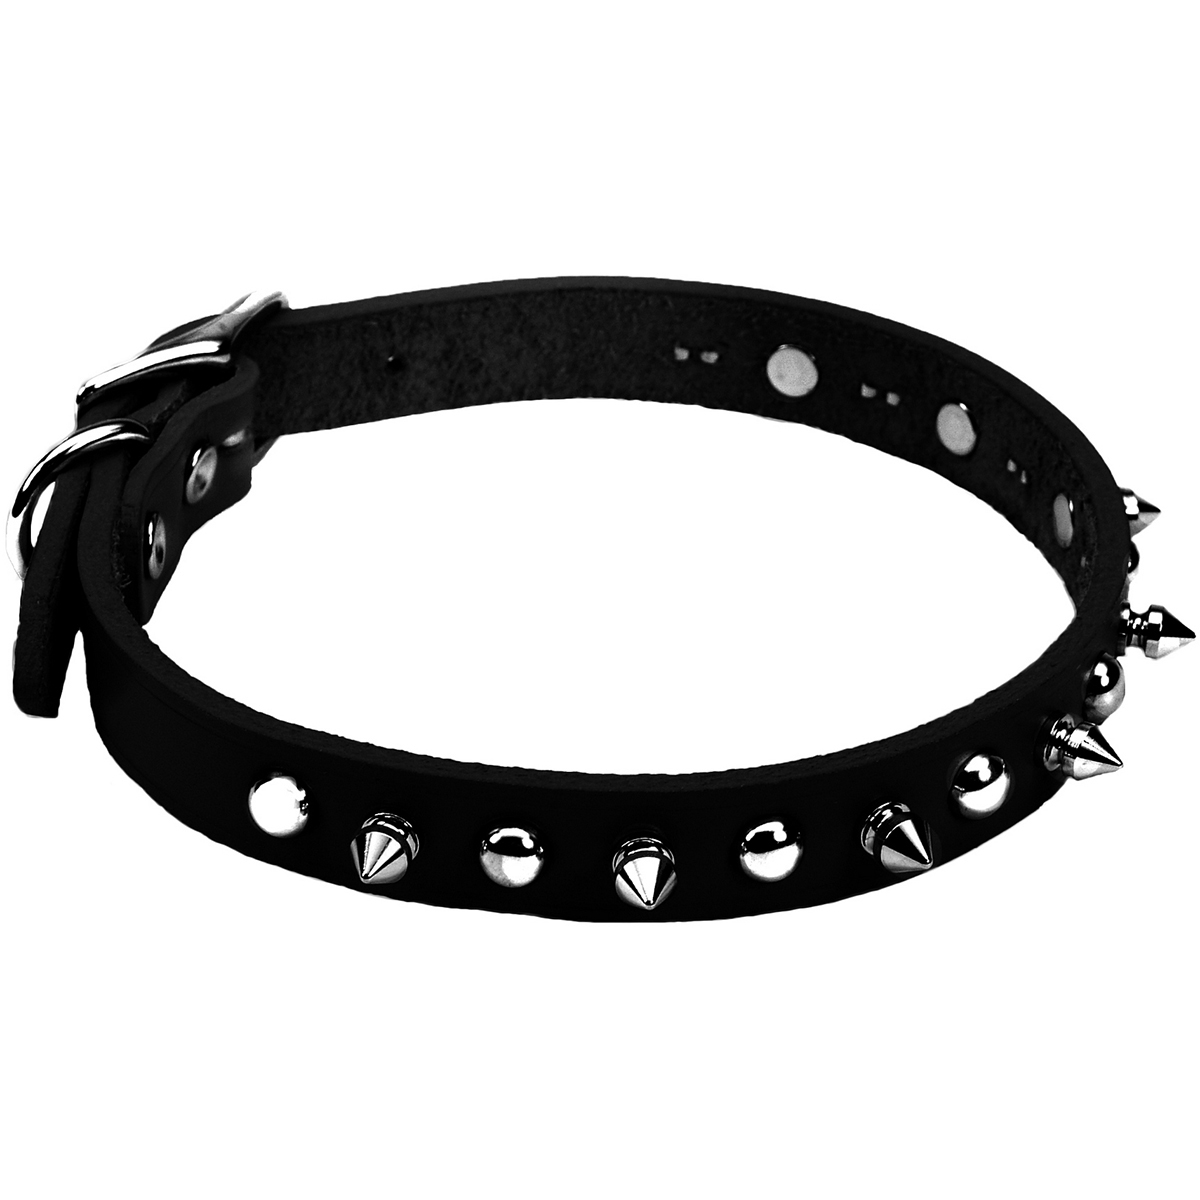 01705k16-blk16 0.62 X 16 In. Circle T Oak Tanned Leather Spiked Dog Collar, Black